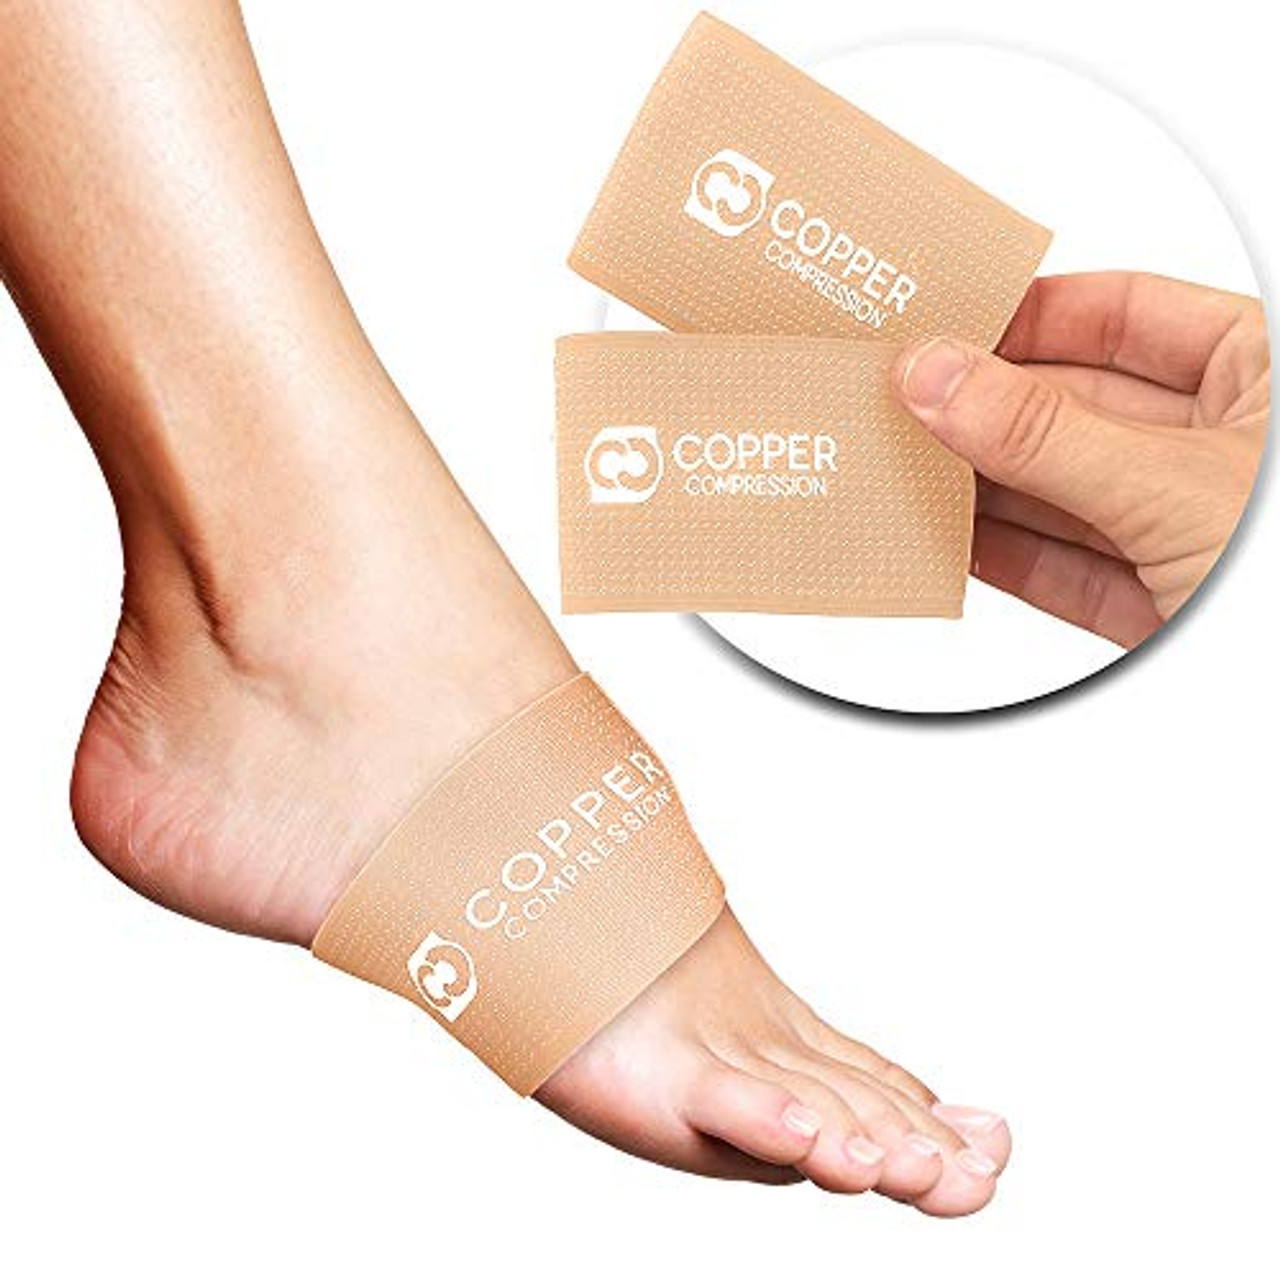 Copper Compression Recovery Foot Sleeves / Plantar Fasciitis Support Socks  - GUARANTEED To Speed Up Recovery & Provide Relief Of Heel Spurs, Arch  Pain, Foot Swelling & Ankle Injuries 1 PAIR, Medium